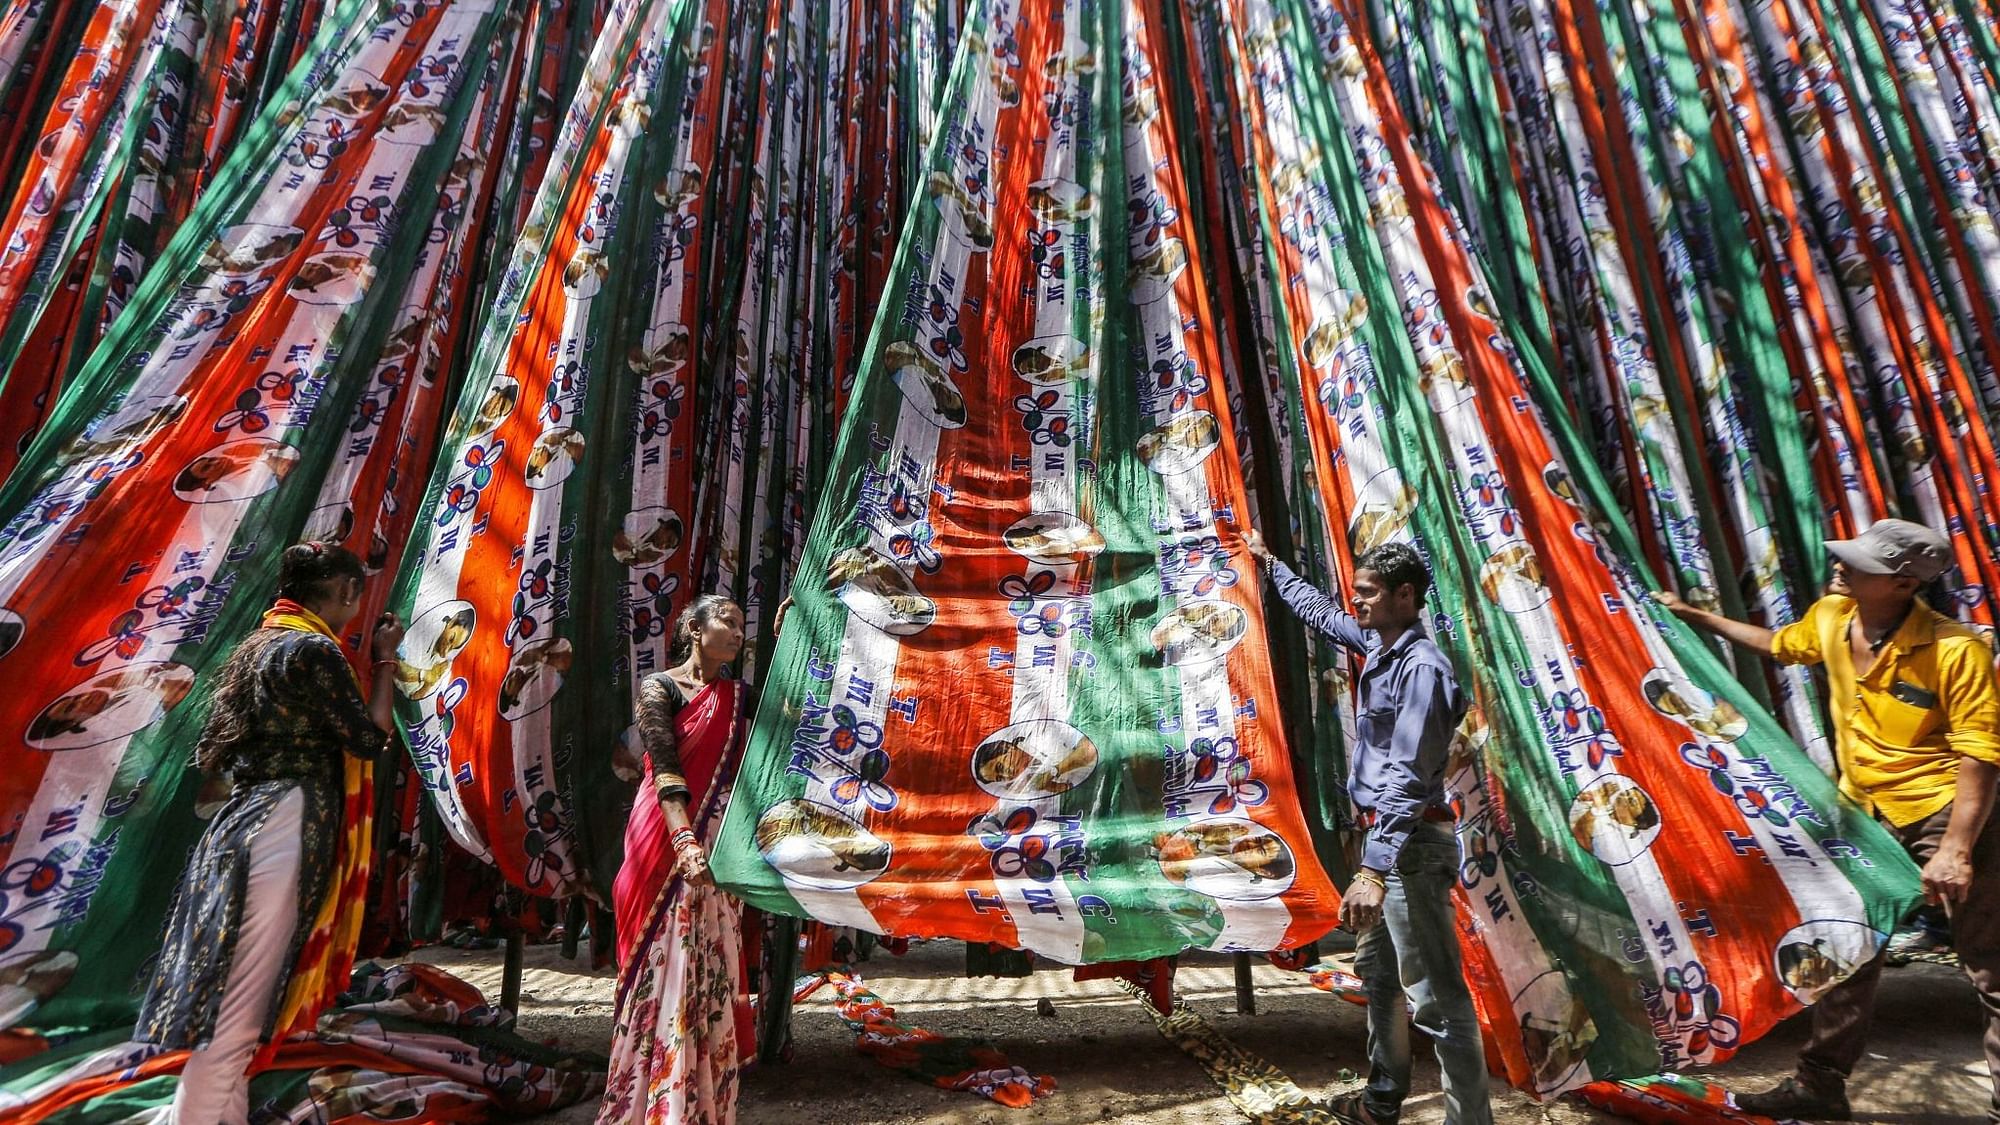 Workers dry roll Trinamool Congress flags after being manufactured at a factory for the upcoming Assembly polls in several states, in Ahmedabad, Wednesday, 10 March.